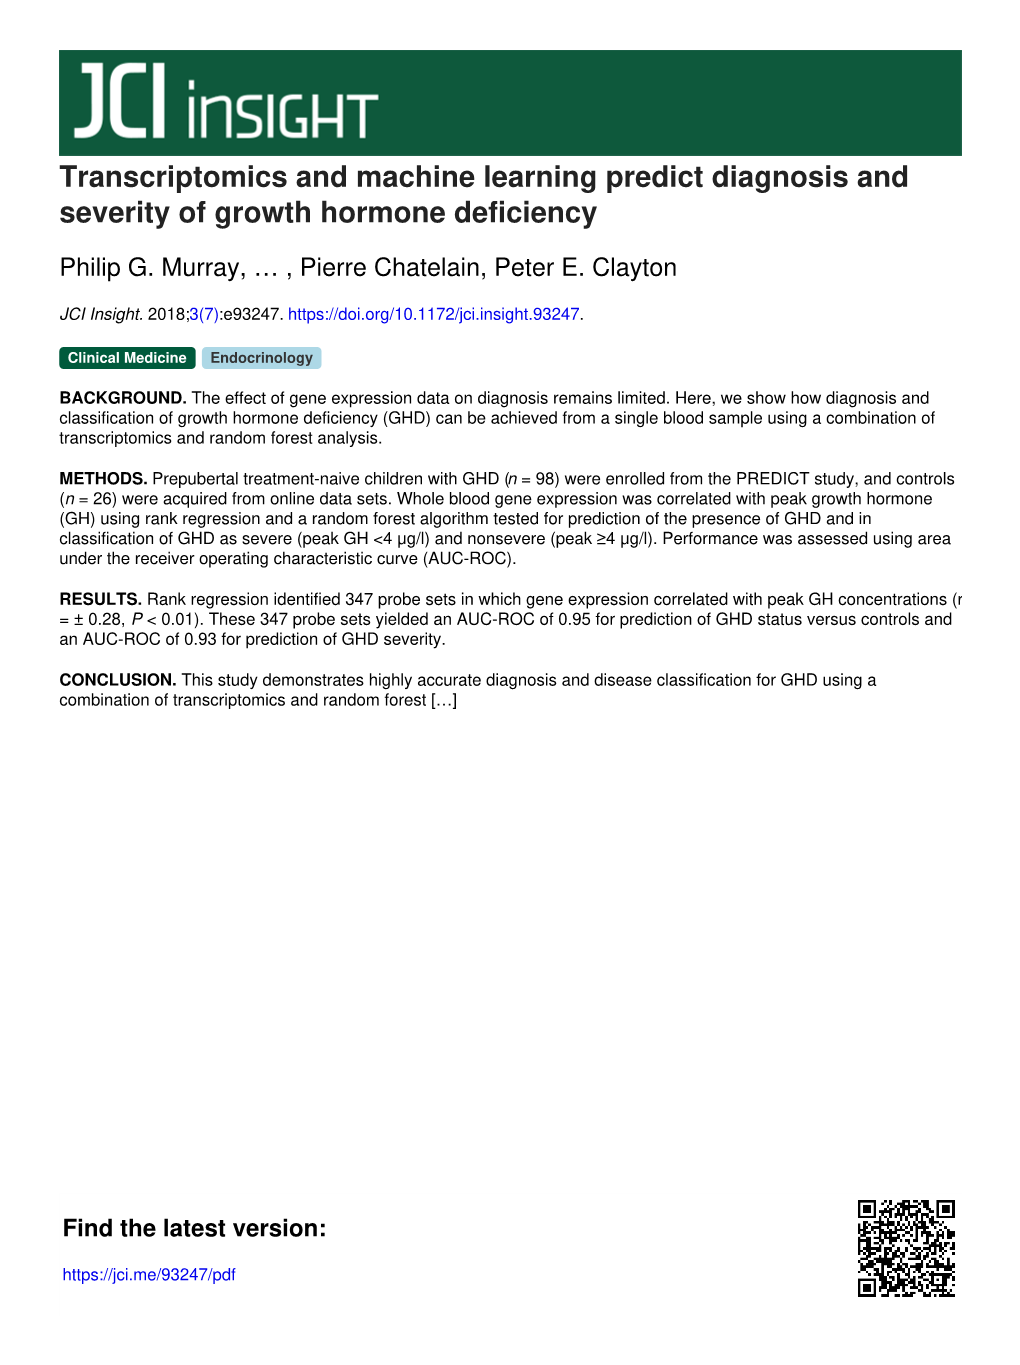 Transcriptomics and Machine Learning Predict Diagnosis and Severity of Growth Hormone Deficiency